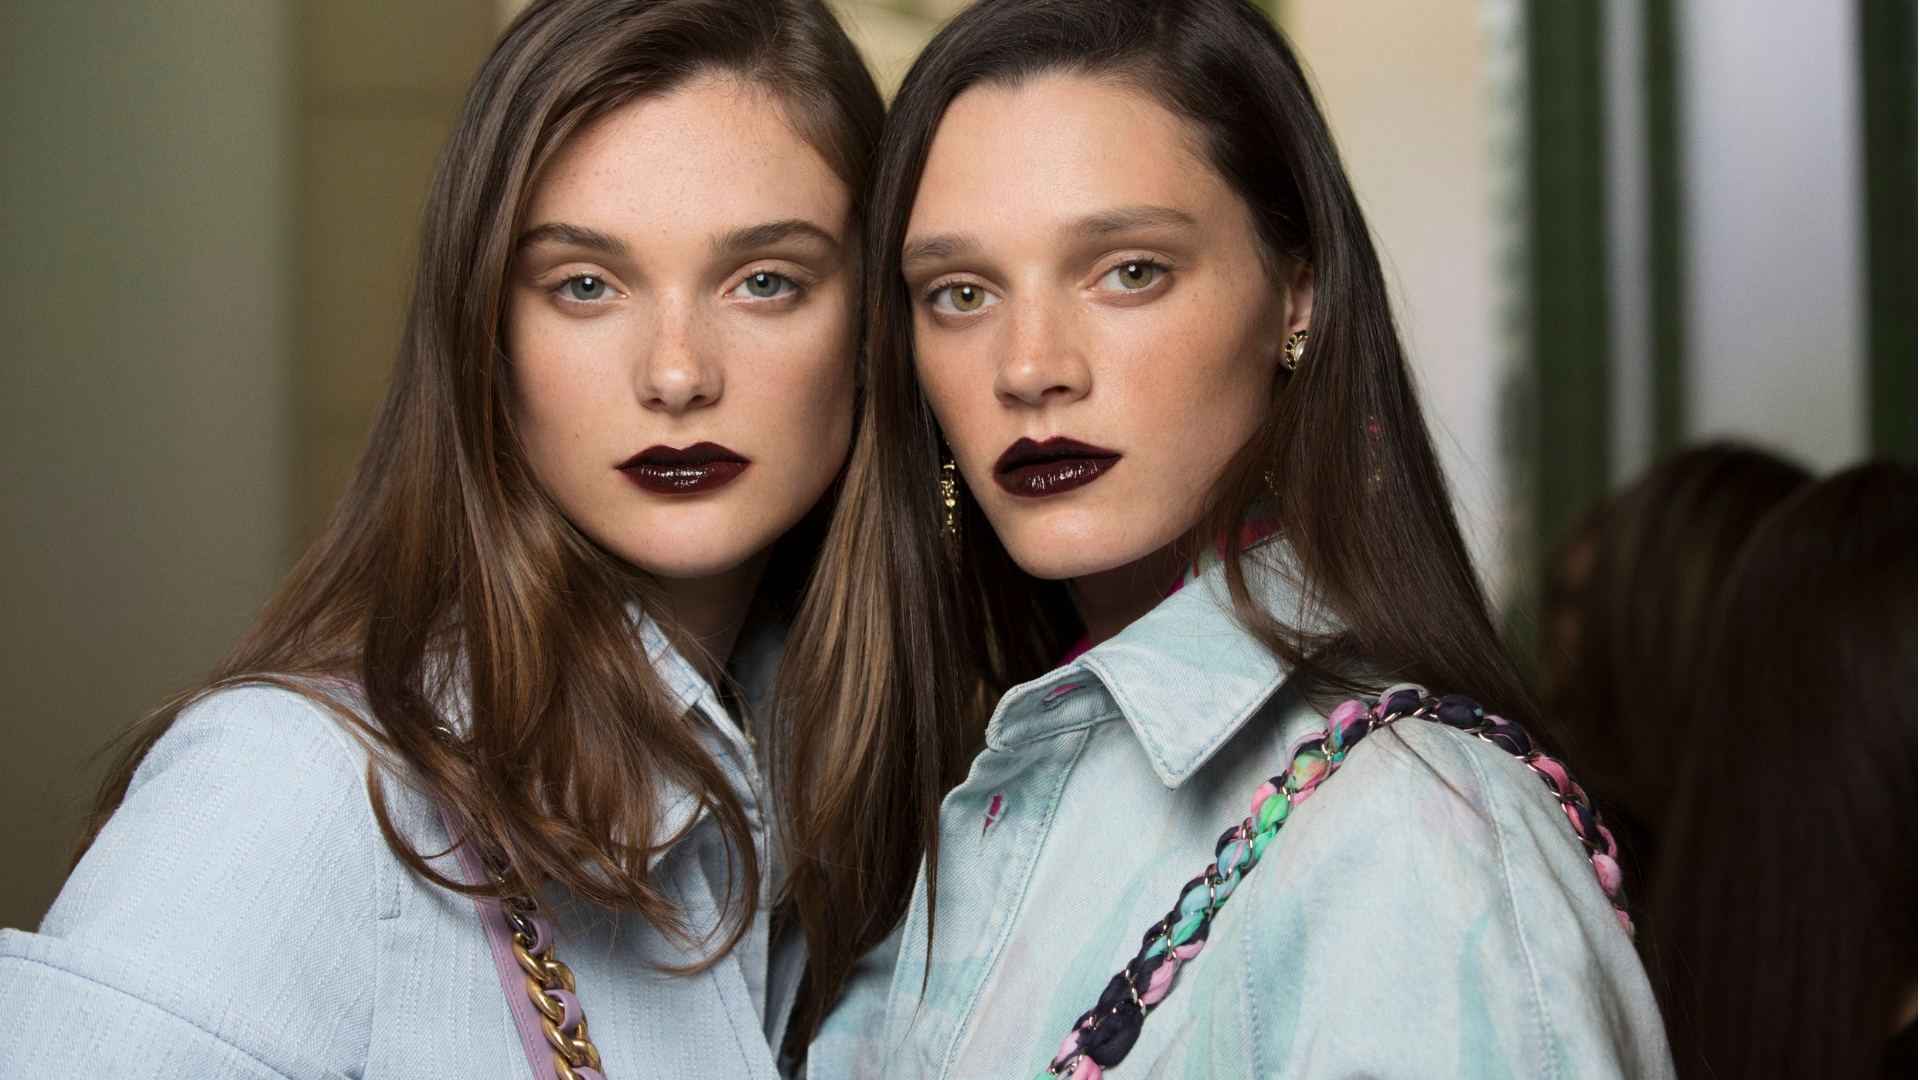 Exclusive: Backstage Beauty at Chanel Cruise 2020